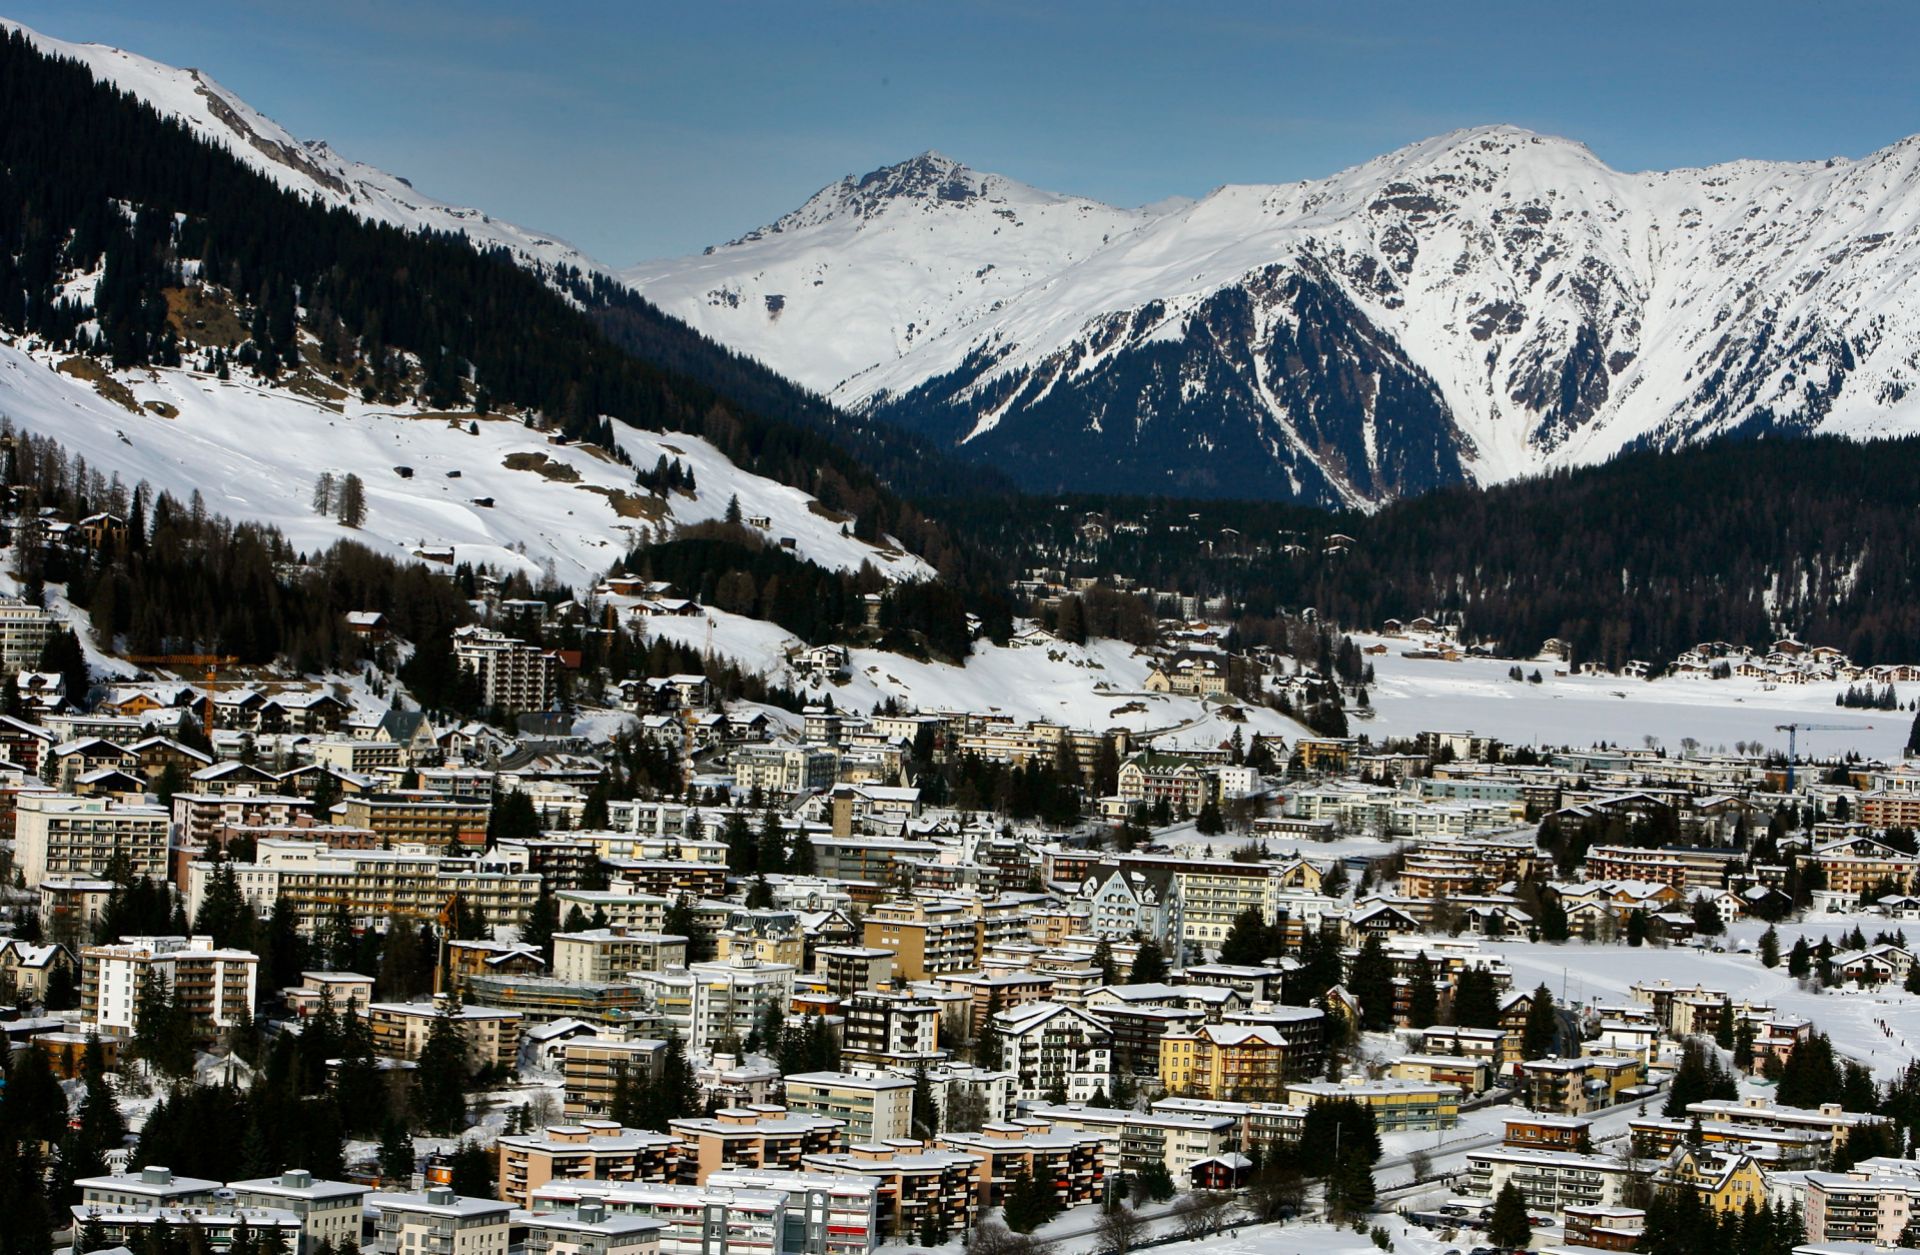 The world's business and political leaders are gathering this week in Davos, Switzerland, for the World Economic Forum.